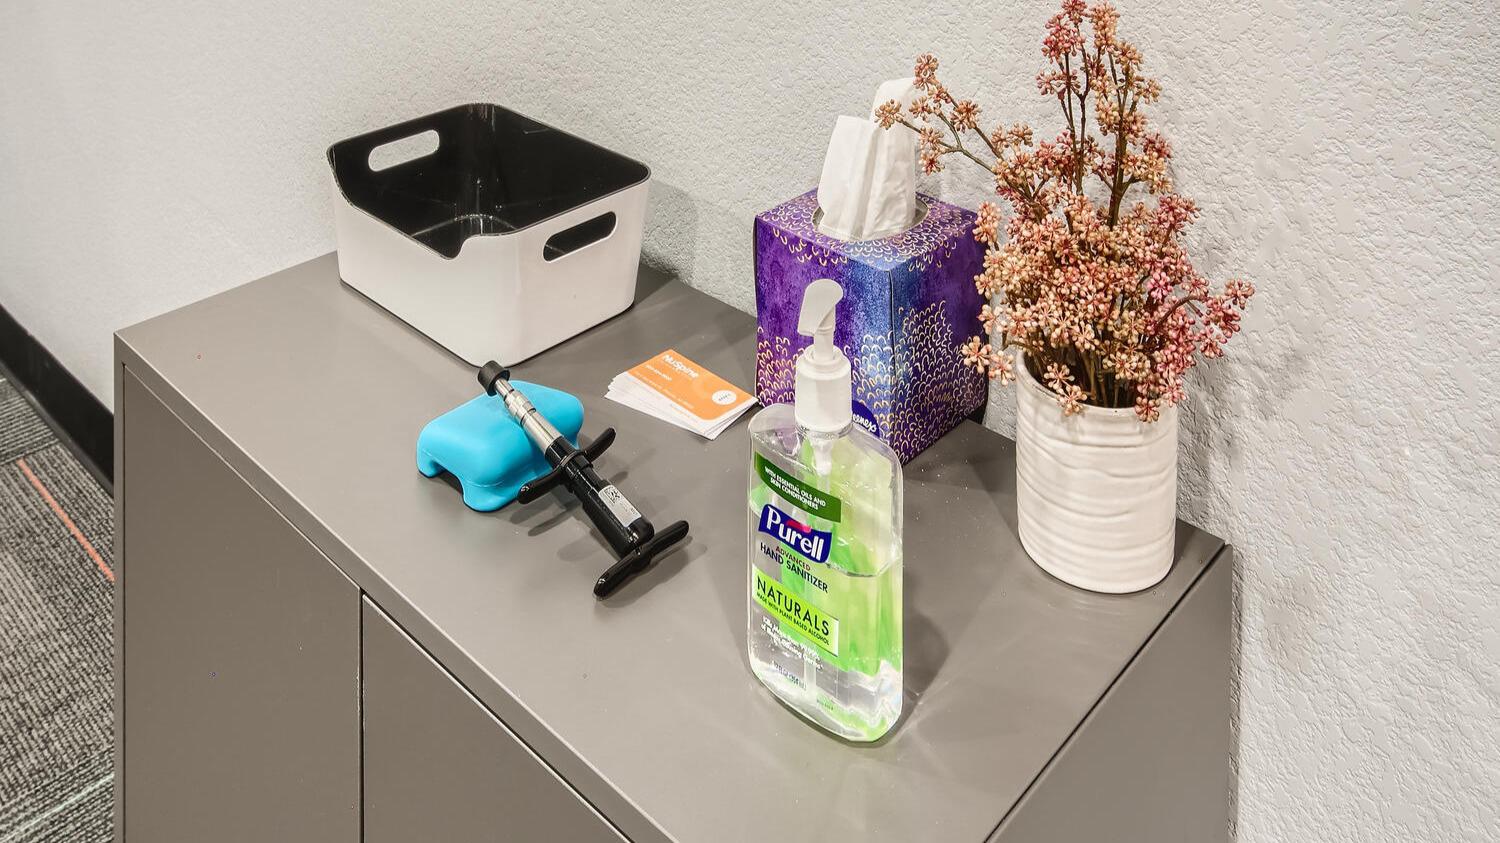 NuSpine Chiropractic offers a clean space that is sanitized daily.